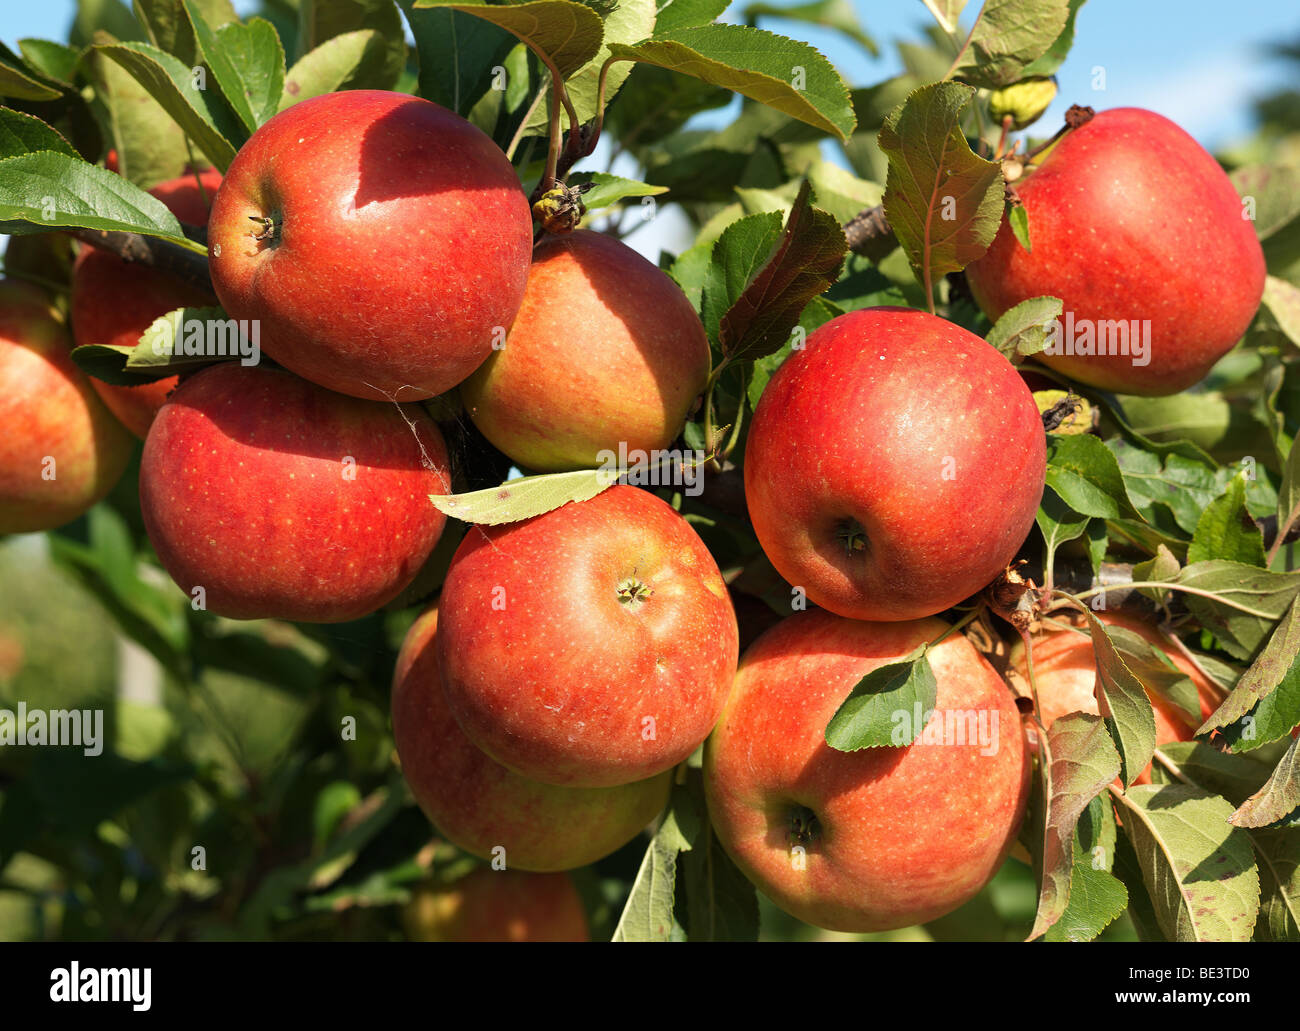 Apple tree / trees pictured during the harvest time in the Old Land/Jork, Lower Saxony, Germany September 16, 2009. Stock Photo